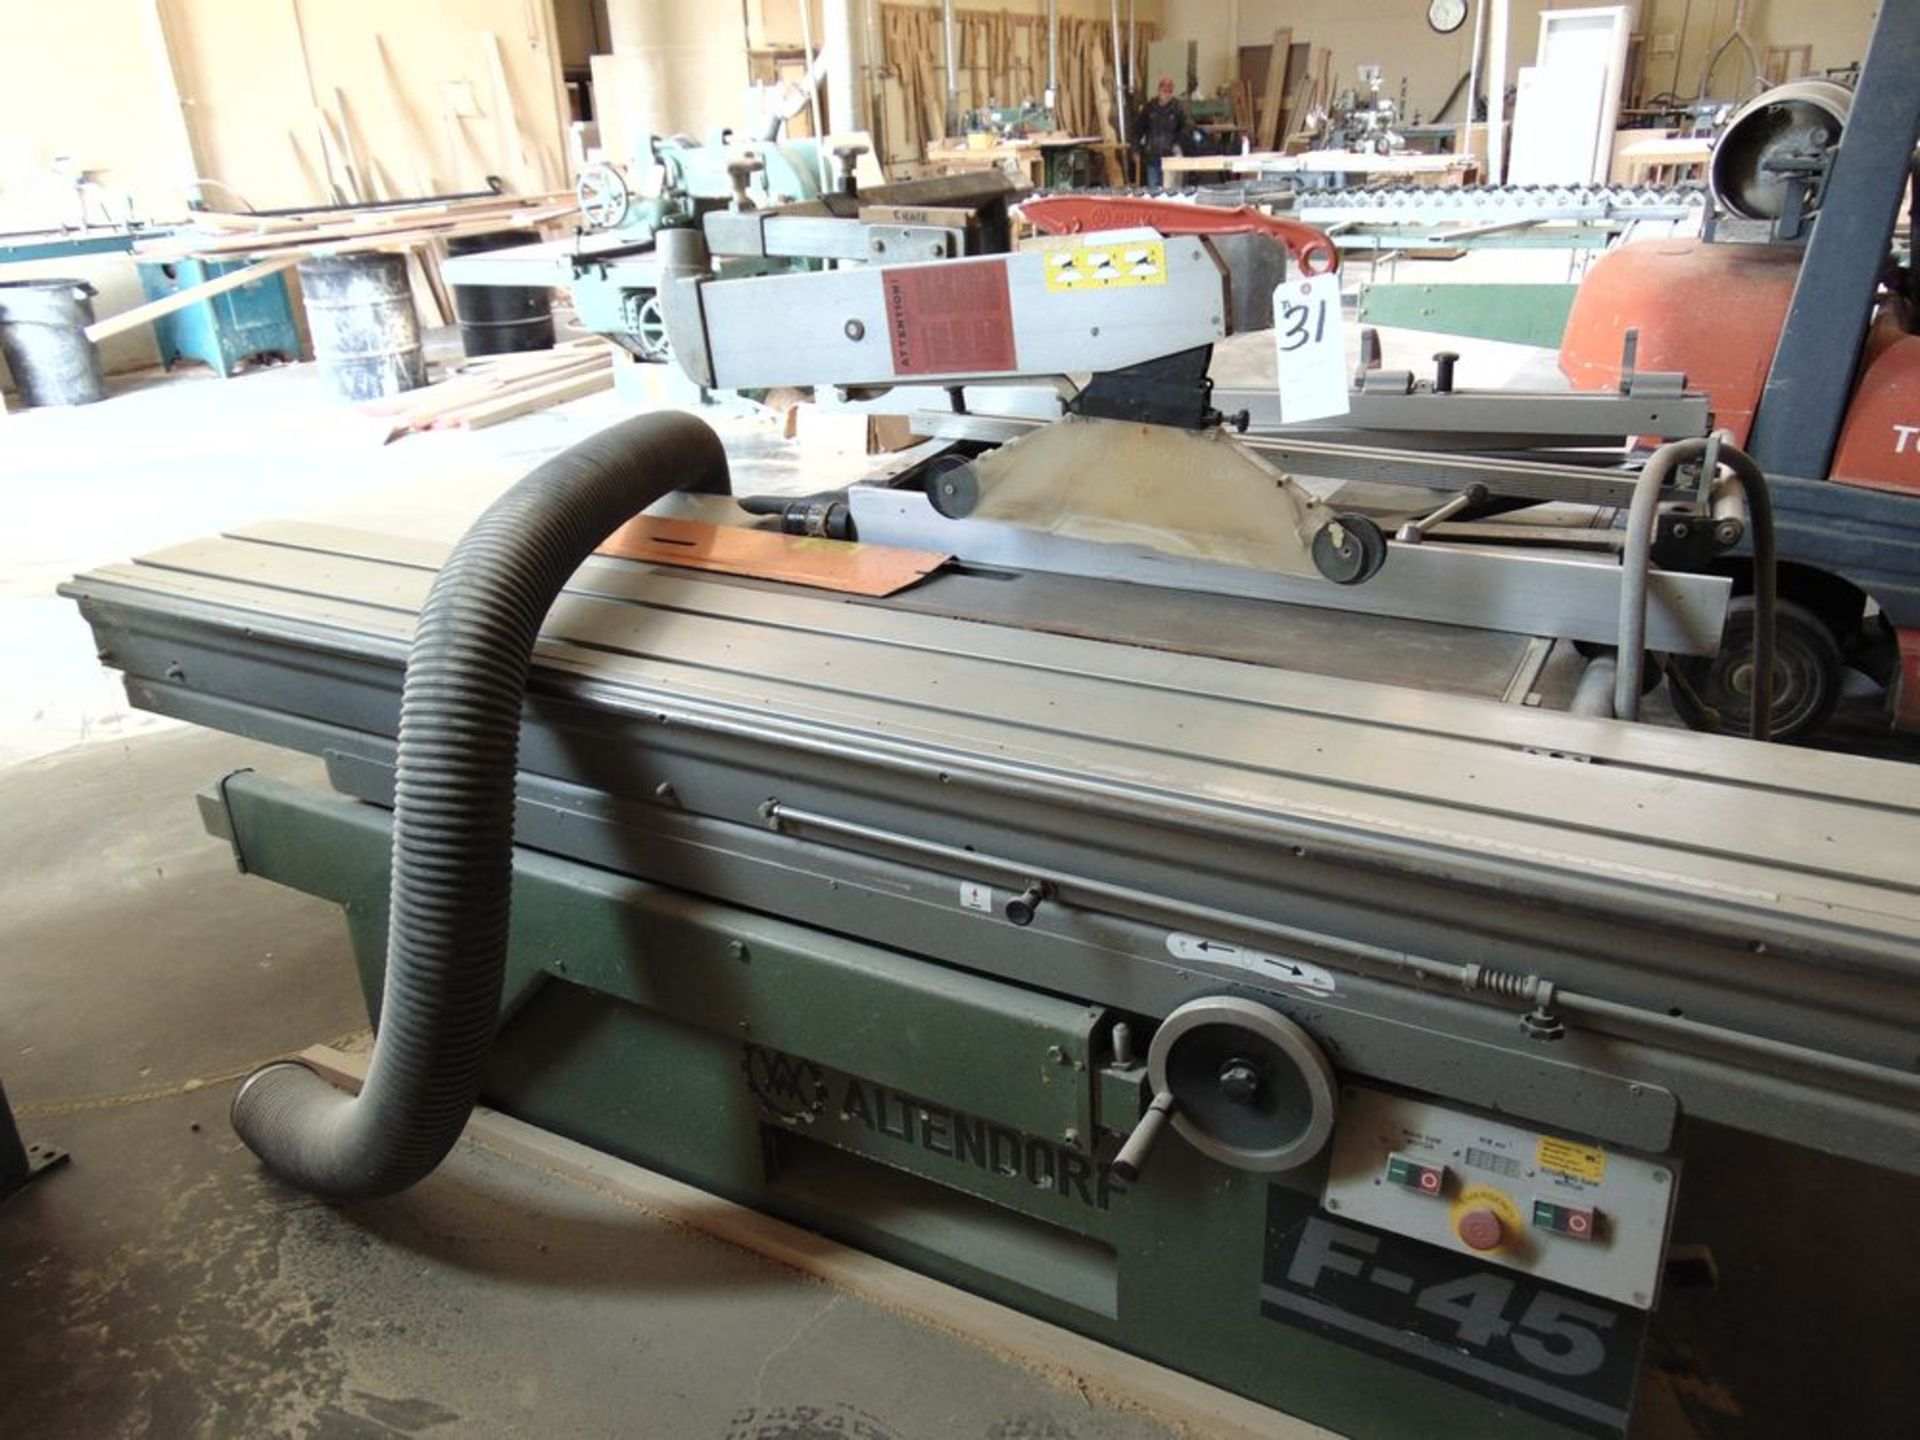 Altendorf mod. F-45, Sliding Bed Table Saw S/N 89-11-148